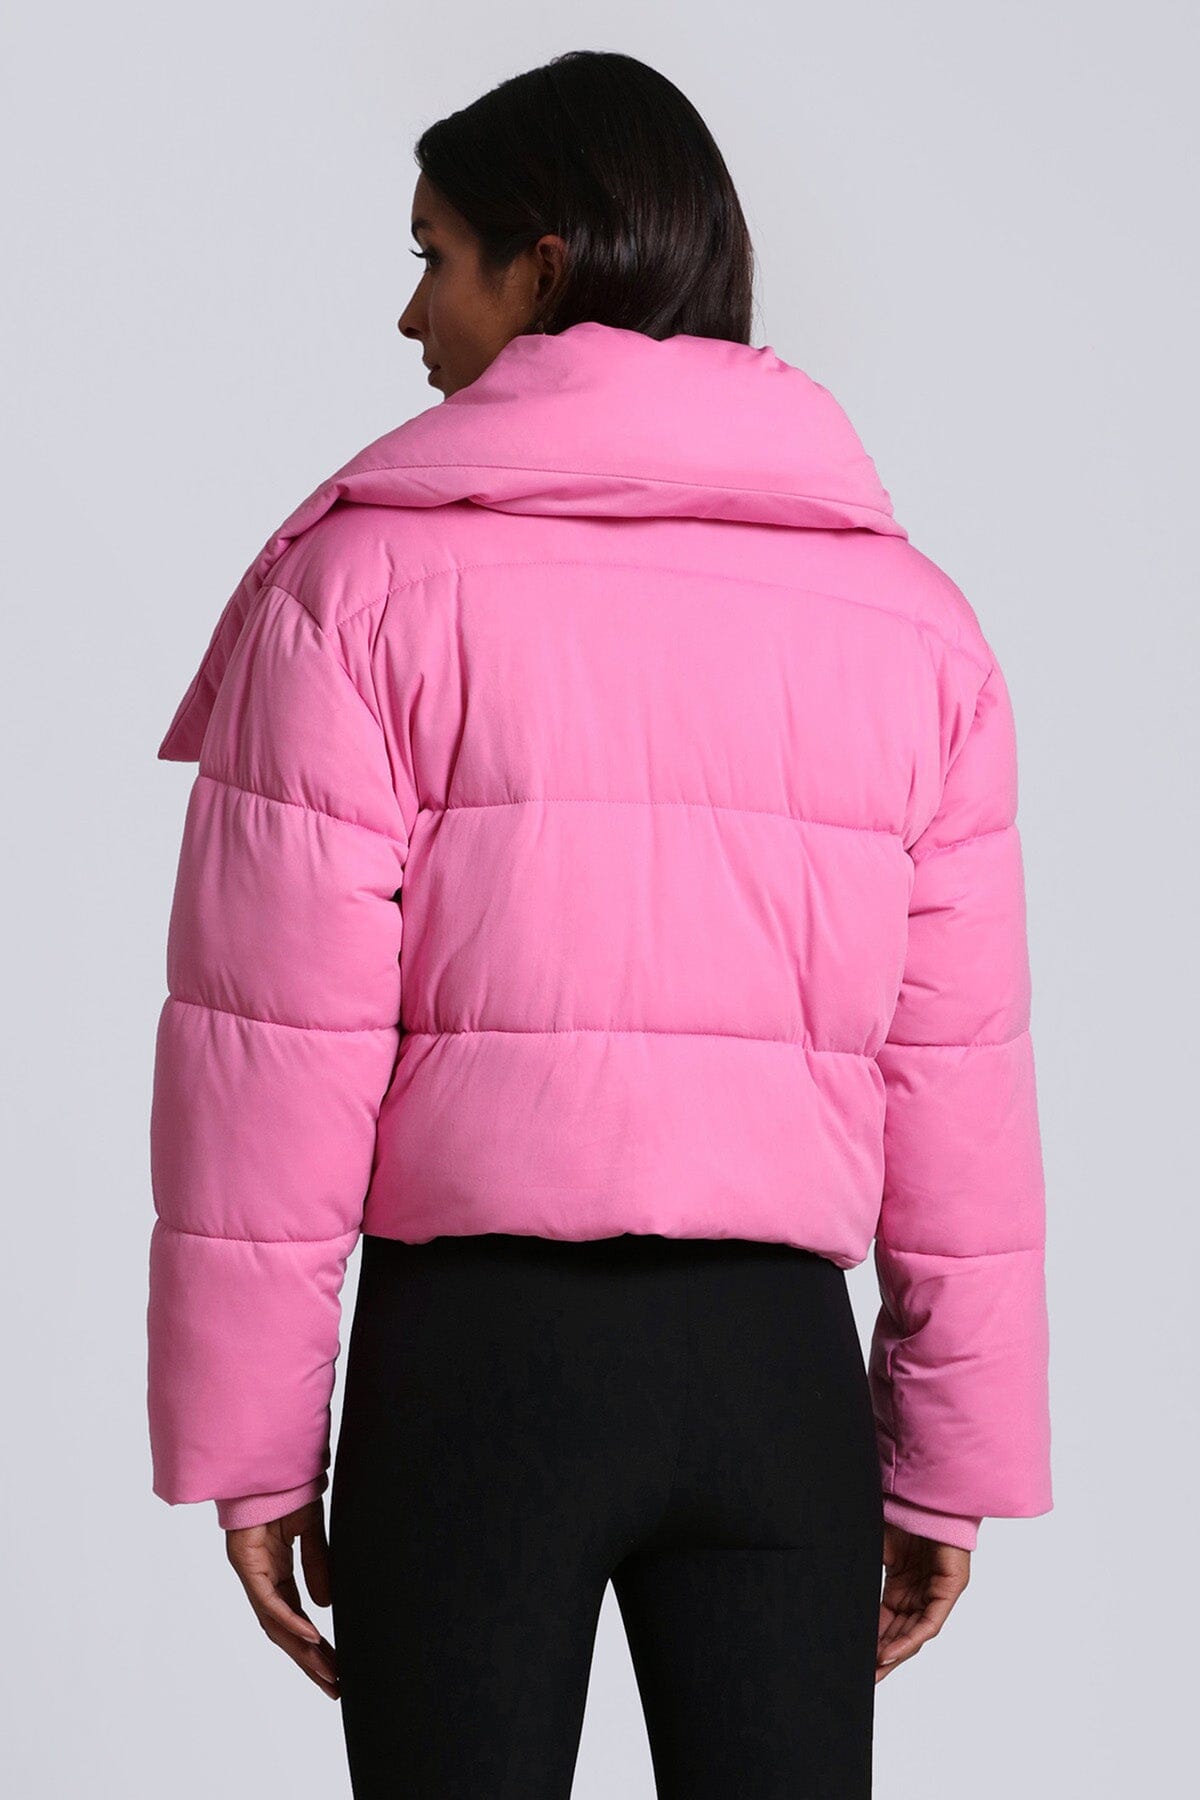 Thermal Puff Envelope Collar Knit Cropped Puffer Coat Jacket Hot Pink - Figure Flattering Designer Fashion Fall Winter Coats Jackets for Women